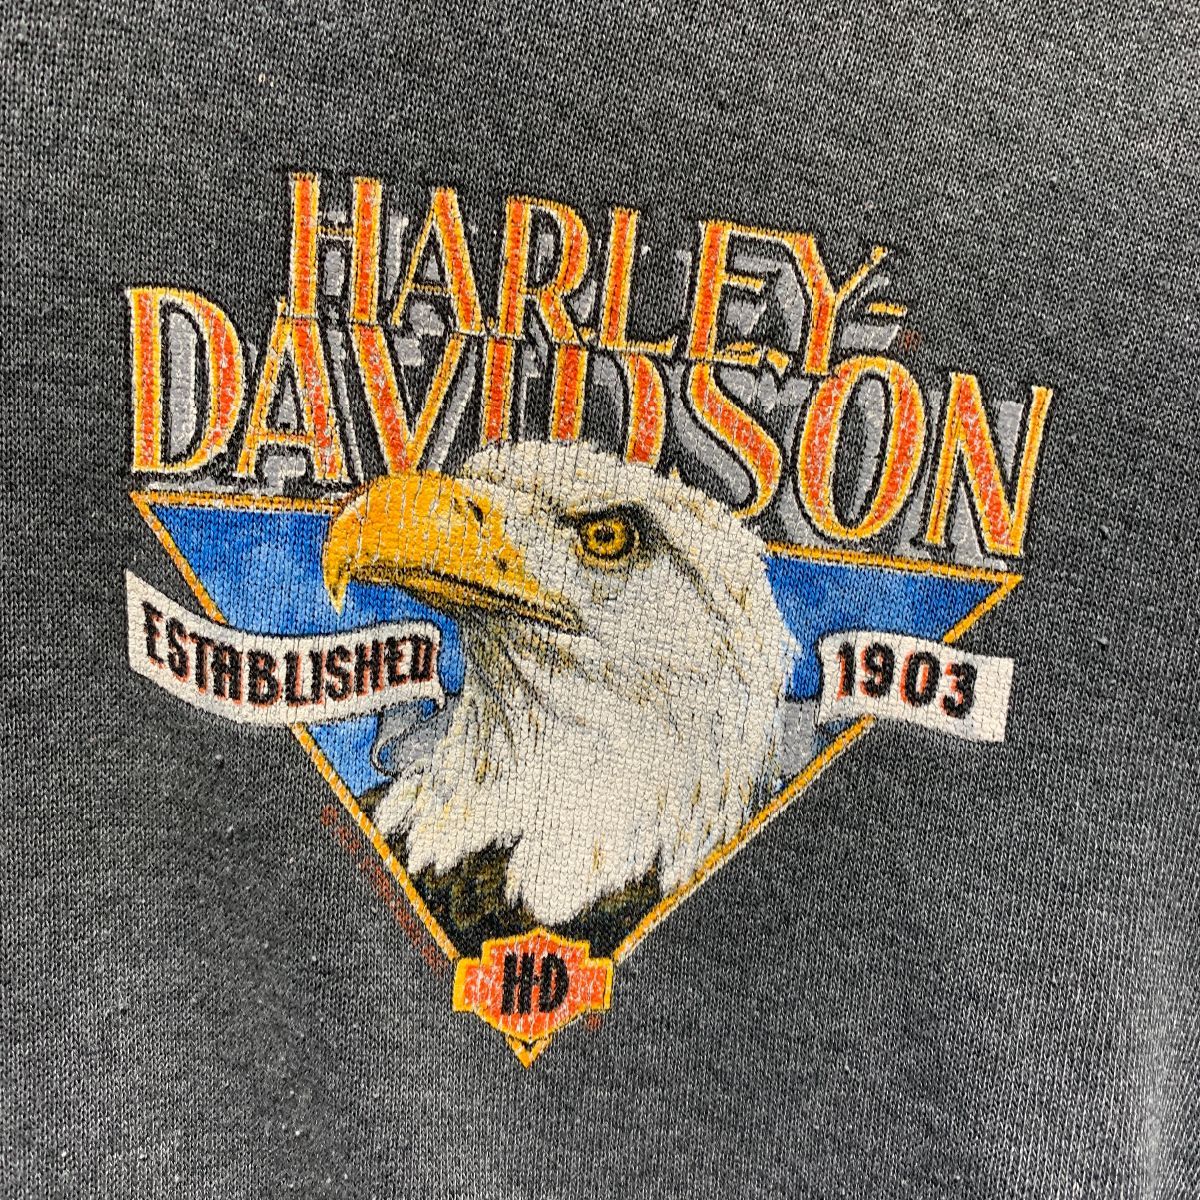 Awesome Distressed And Tattered Harley Davidson Hooded Sweatshirt ...